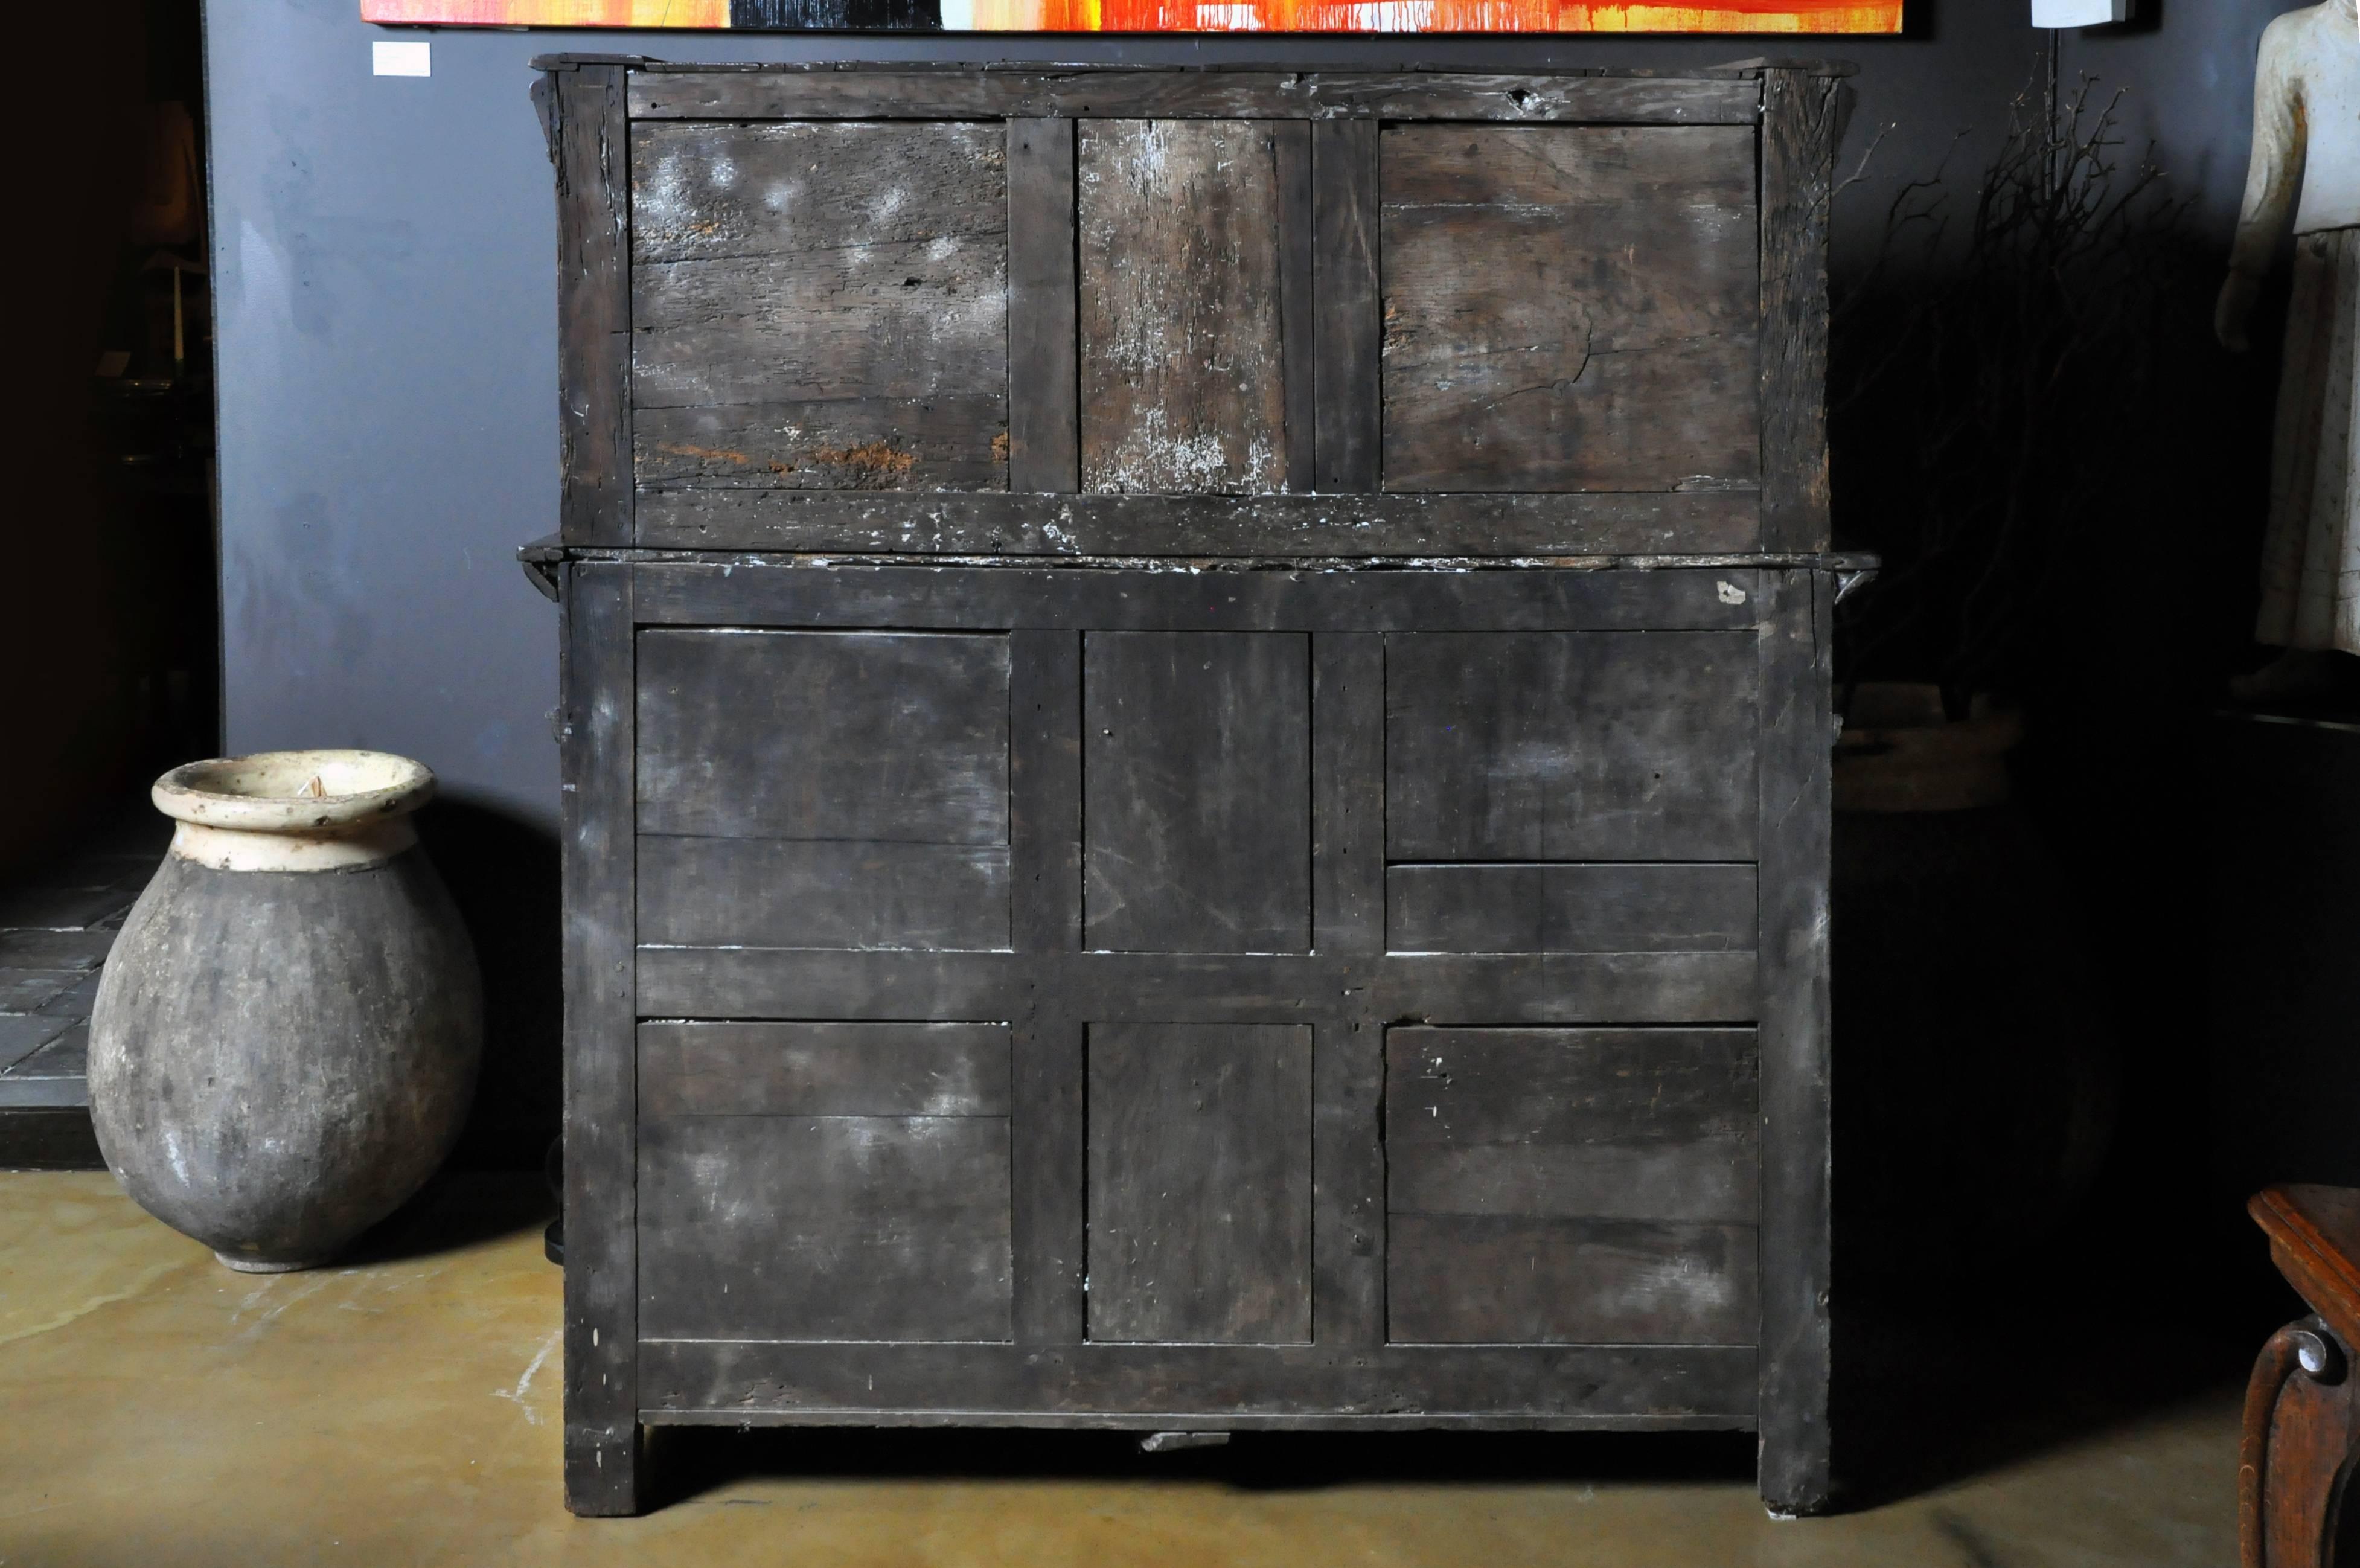 Hand-carved oakwood, 18th century, possibly earlier. Original finish throughout and no replacement or missing parts. Hardware is hand-forged iron. Marquetry decoration on door panels and crown. False drawers flank operable center drawer. All drawer